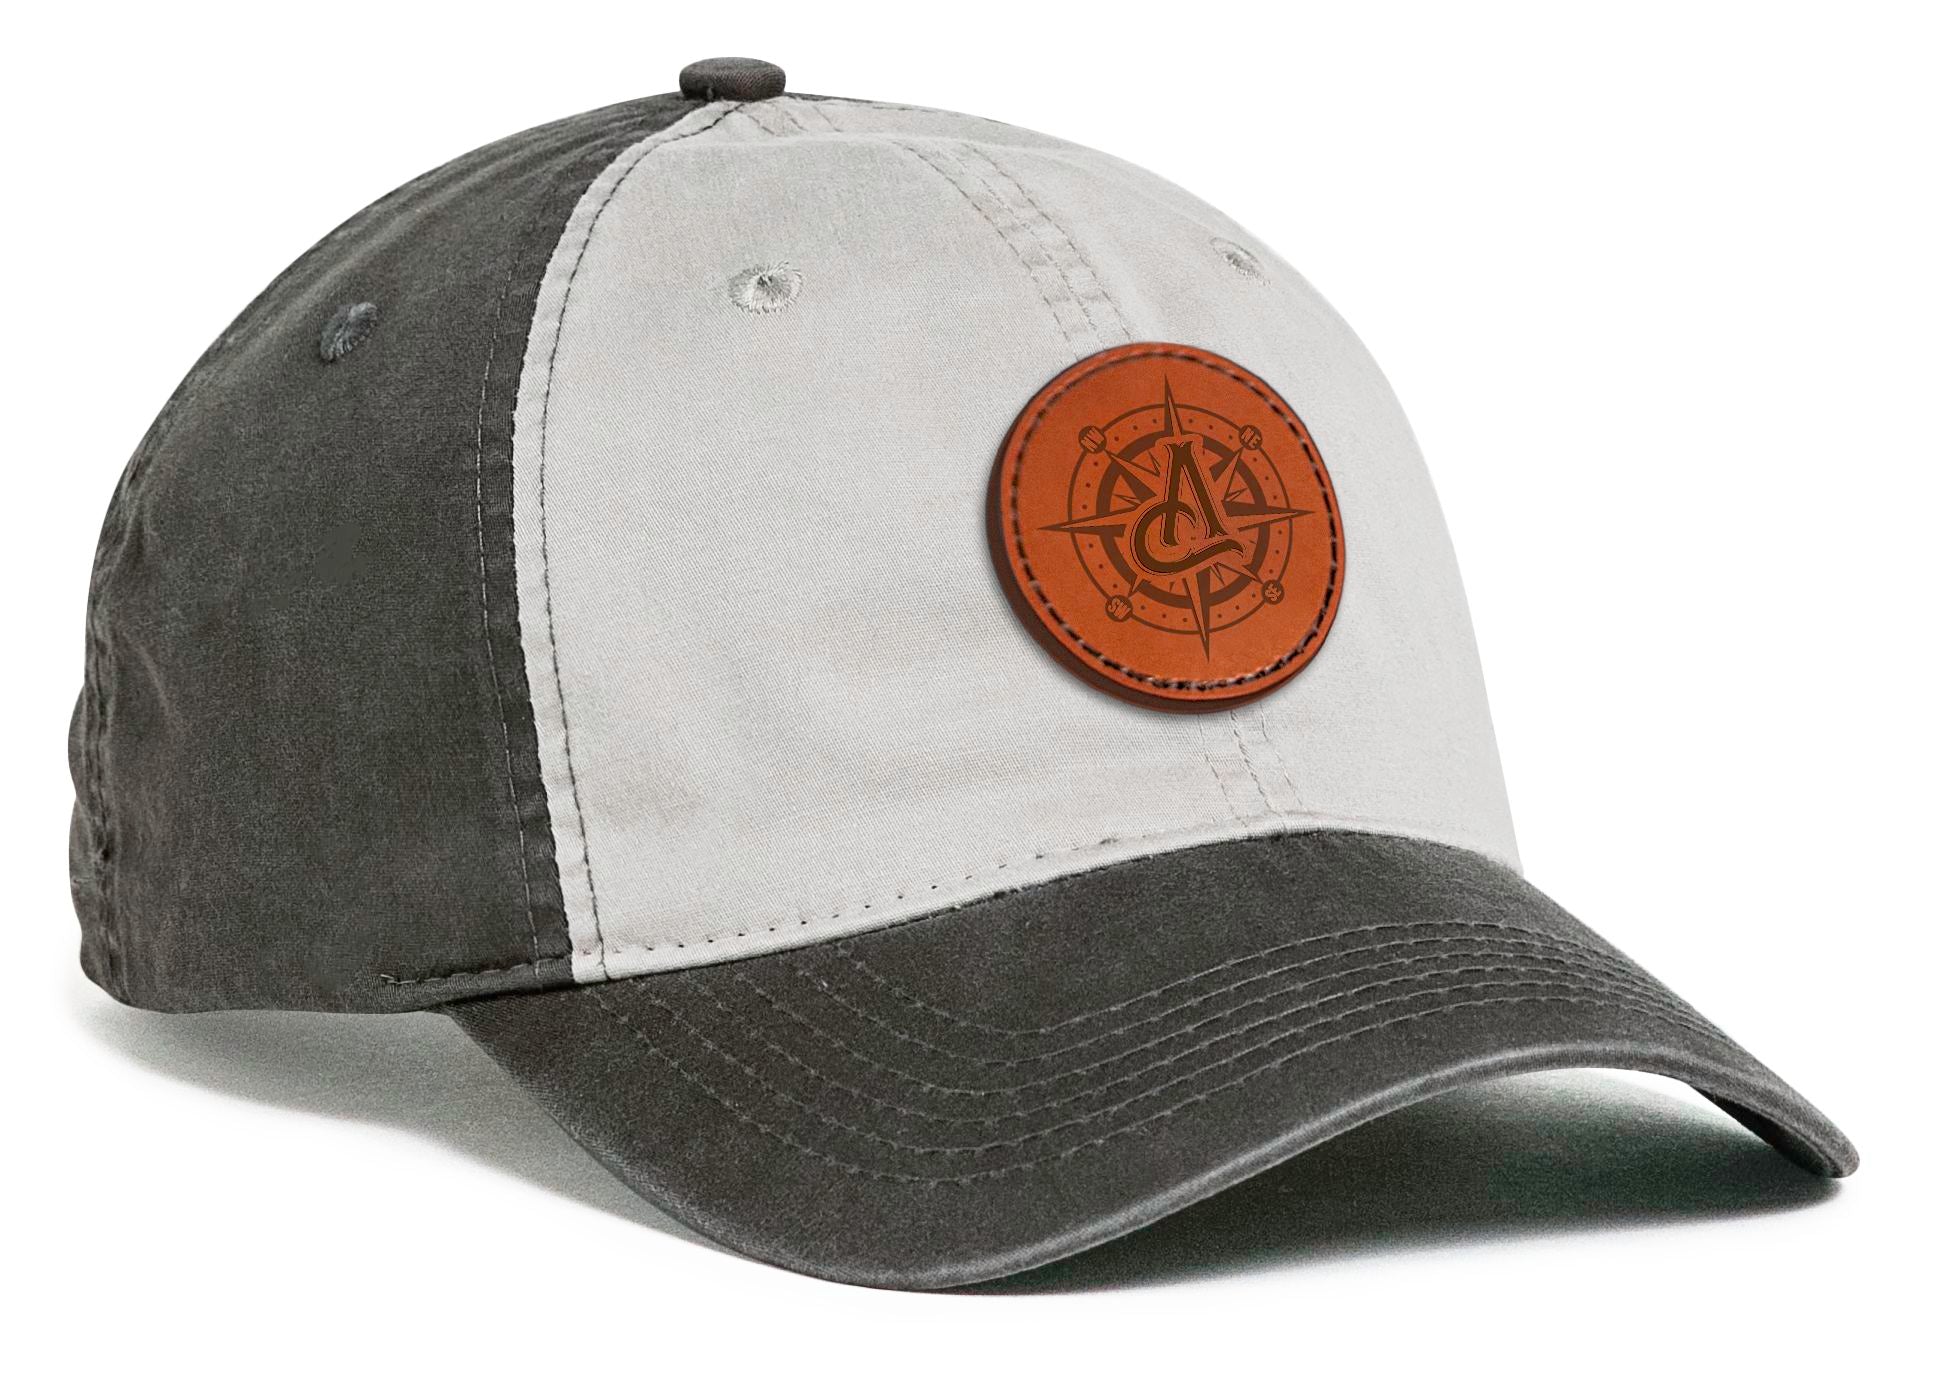 Apparel Catalog Unstructured Hats